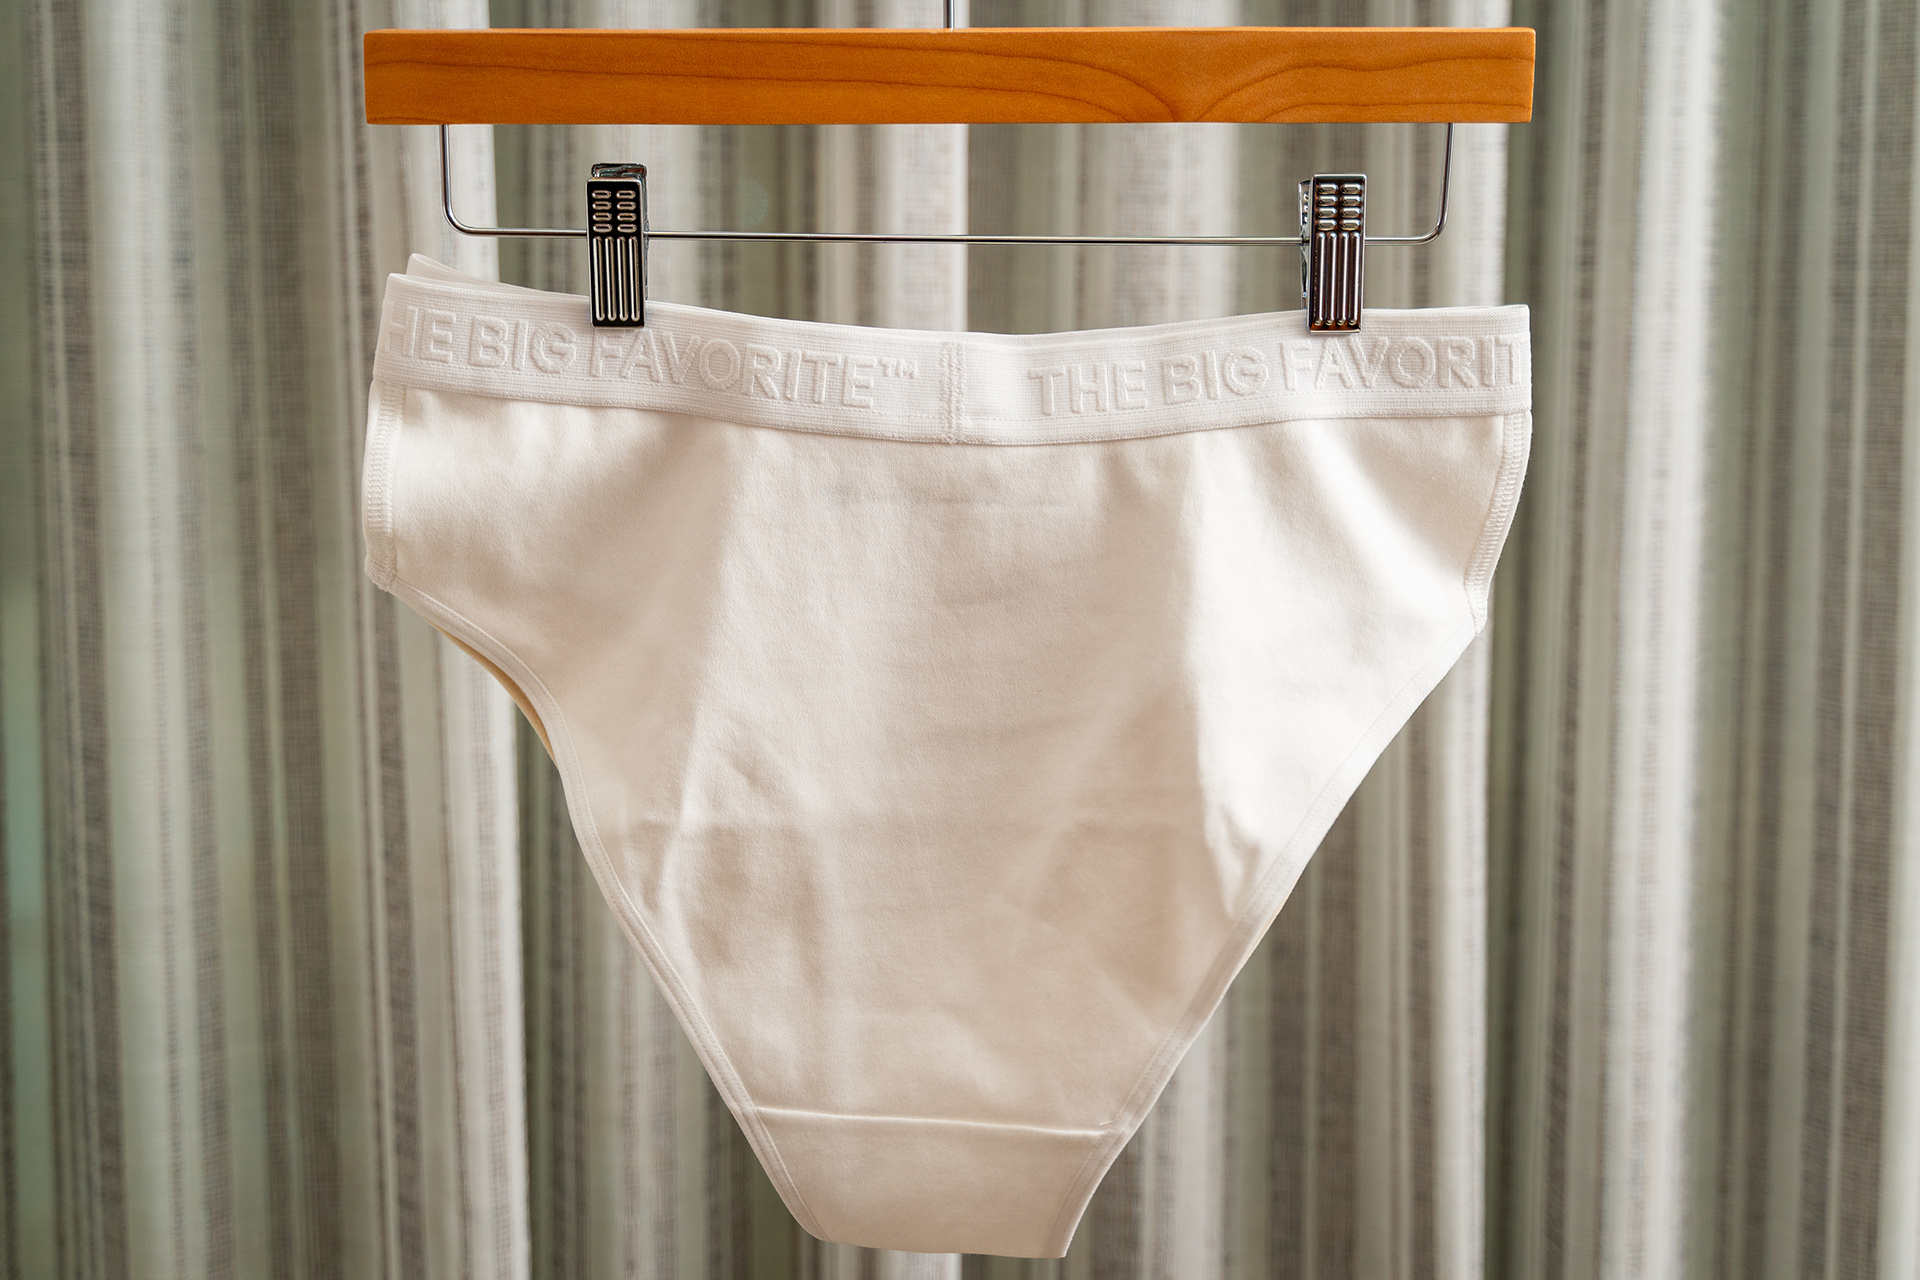 Bota Undergarments Launches First Underwear Recycling Program in